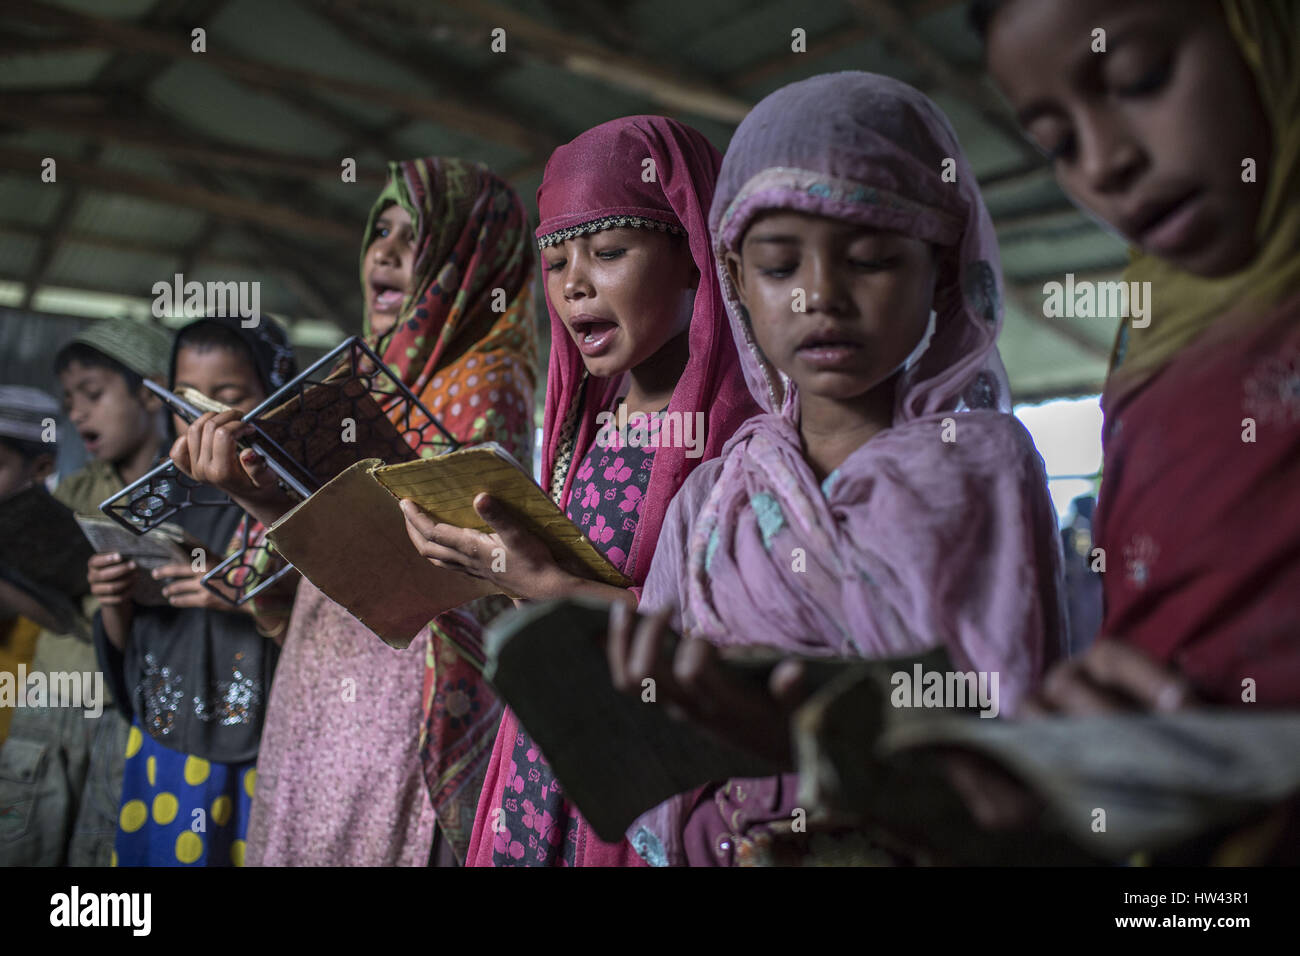 March 7, 2017 - Cox'S Bazar, Chittagong, Bangladesh - Rohingya refugee children attend an Arabic school in Kutupalang Refugee Camp, where they learn to read the Quran, in Cox's Bazar, Bangladesh, March 7, 2017. About 70,000 Rohingya Muslims have fled to Bangladesh from Myanmar since October 9, 2016 after the Burmese military launched clearance operations in response to an attack on border police. There are more than 30,000 registered refugees in Bangladesh but authorities estimate that 300,000 to 500,000 unregistered Rohingya are also already living here. As a result, most of these unregistere Stock Photo